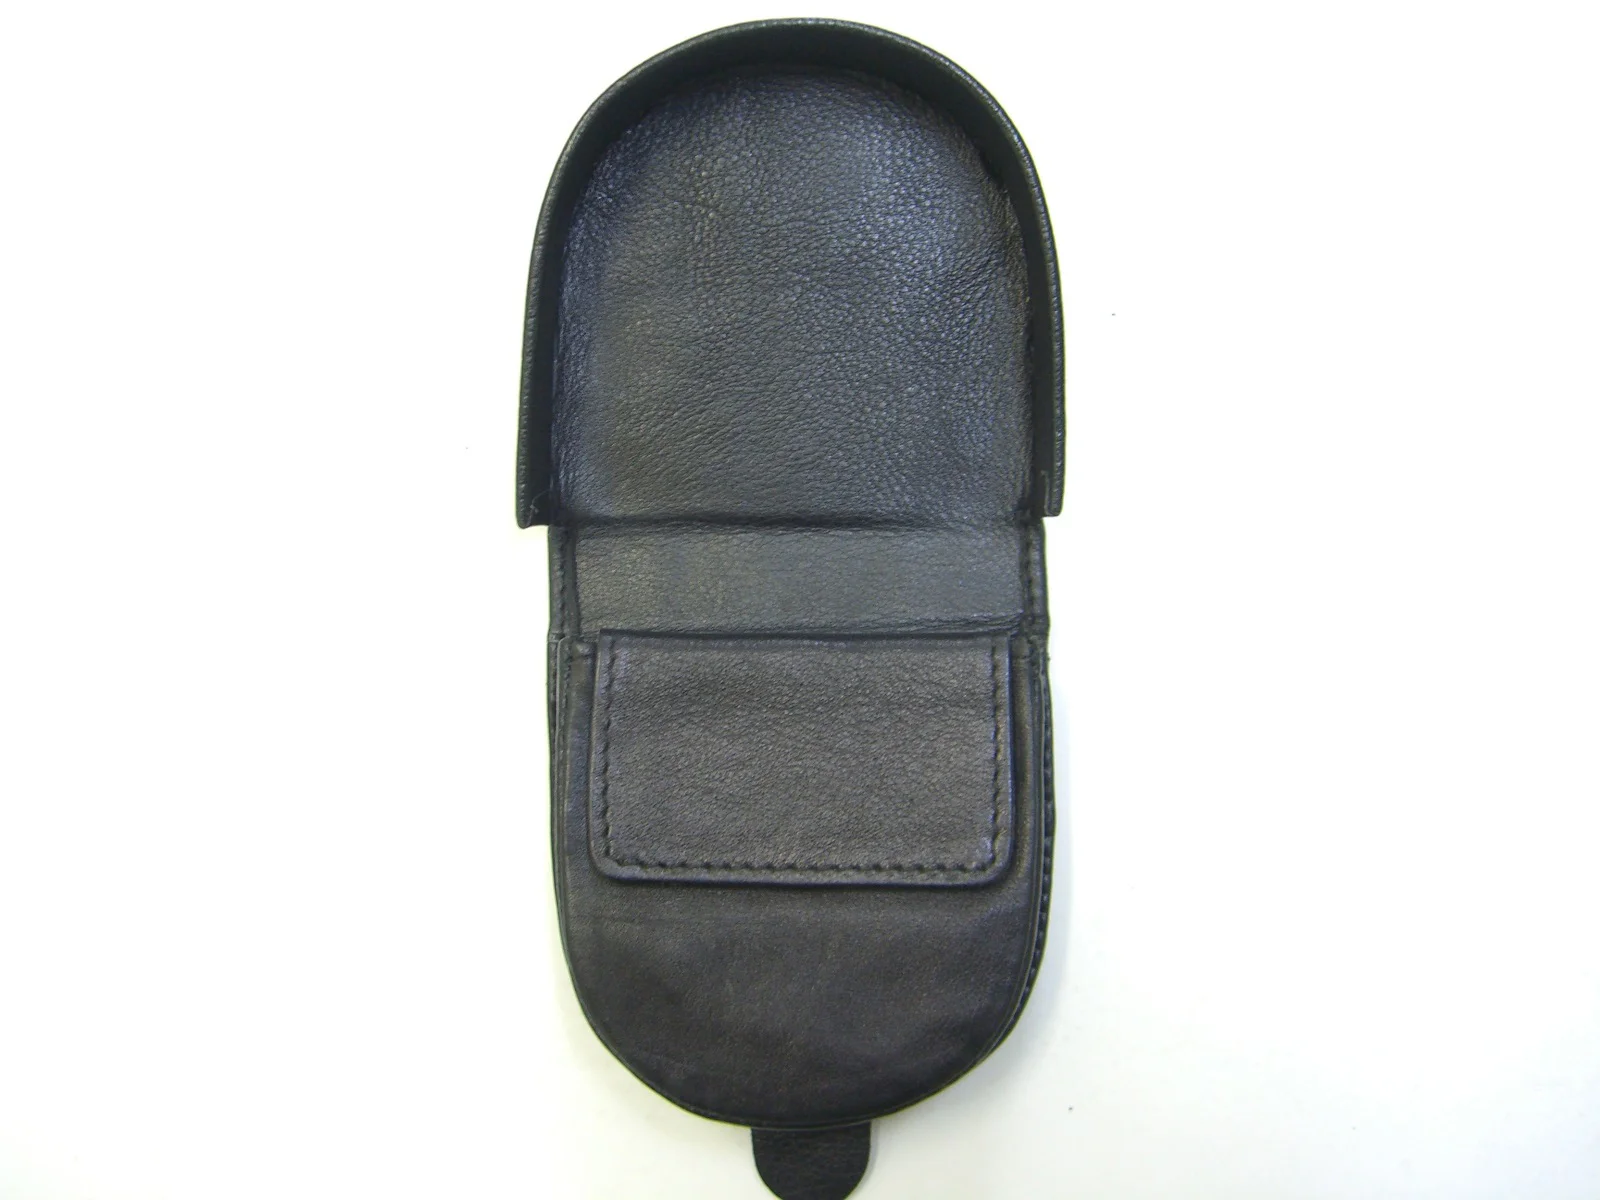 Genuine Leather Flip Up Tray Coin Purse - Made in Australia